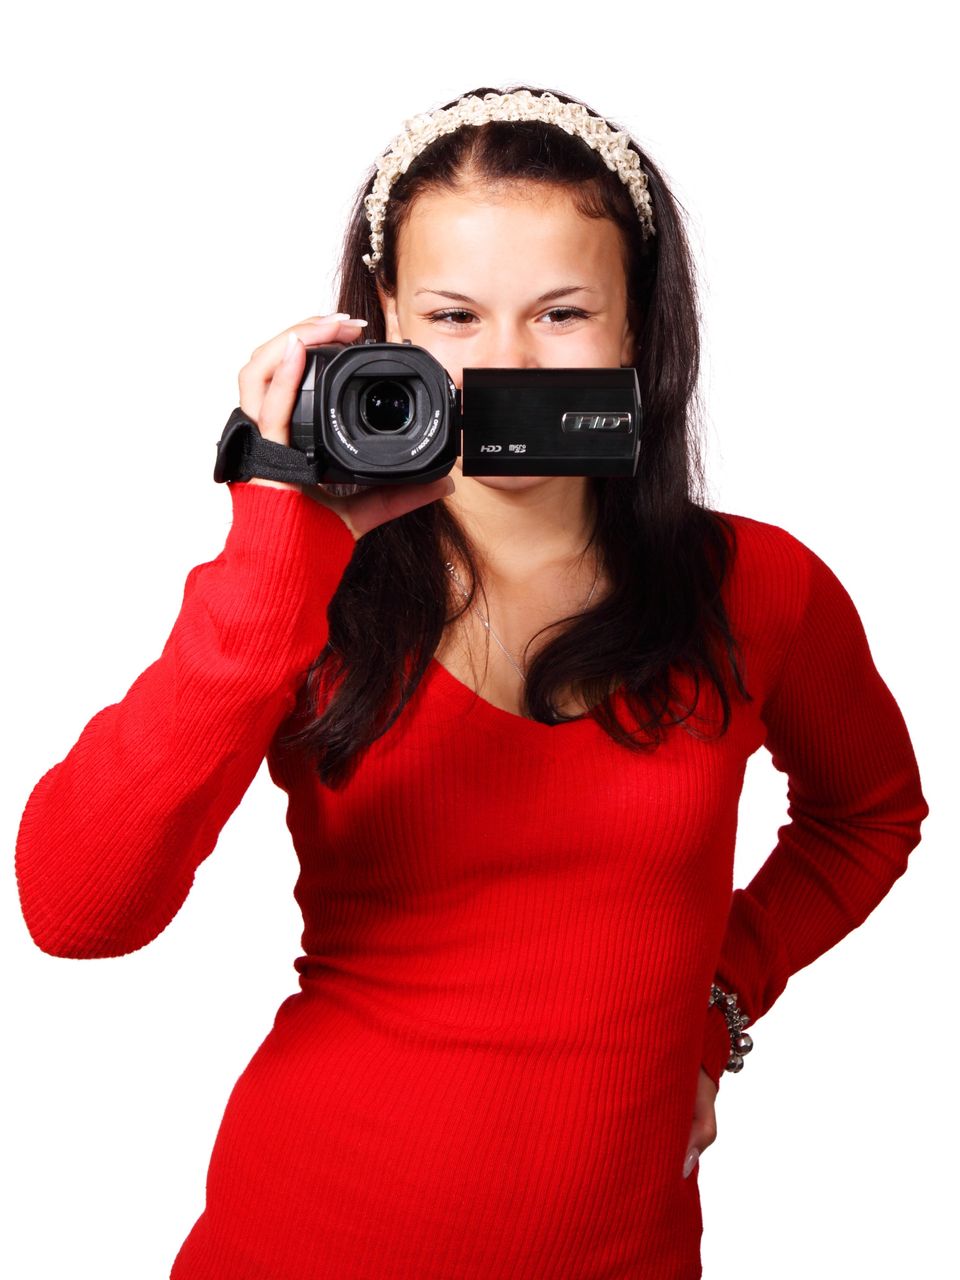 Woman with video camera 18738220161216 10512 1isils7